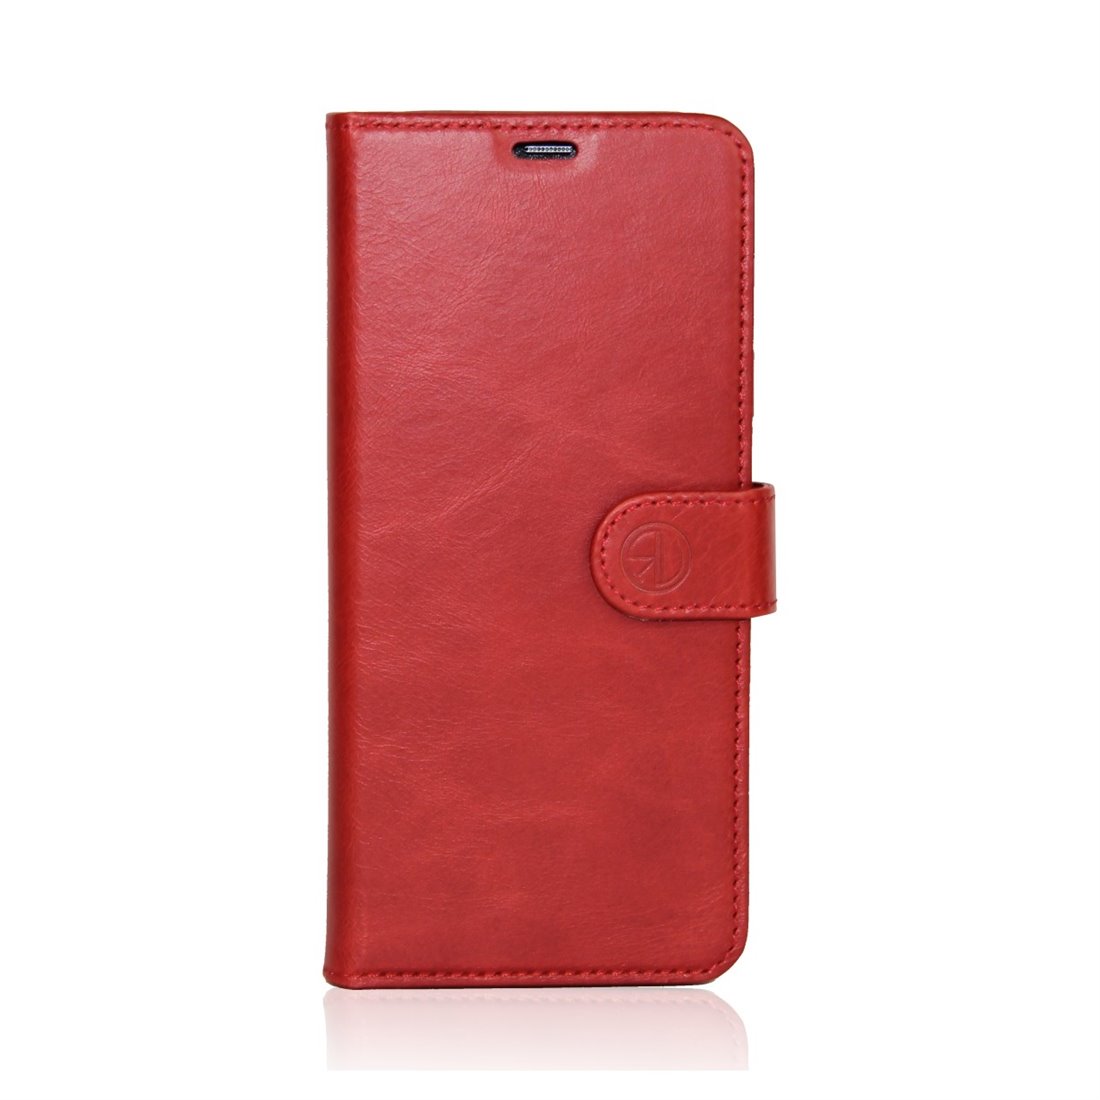 Genuine Leather Book Case iPhone 7/8 Red